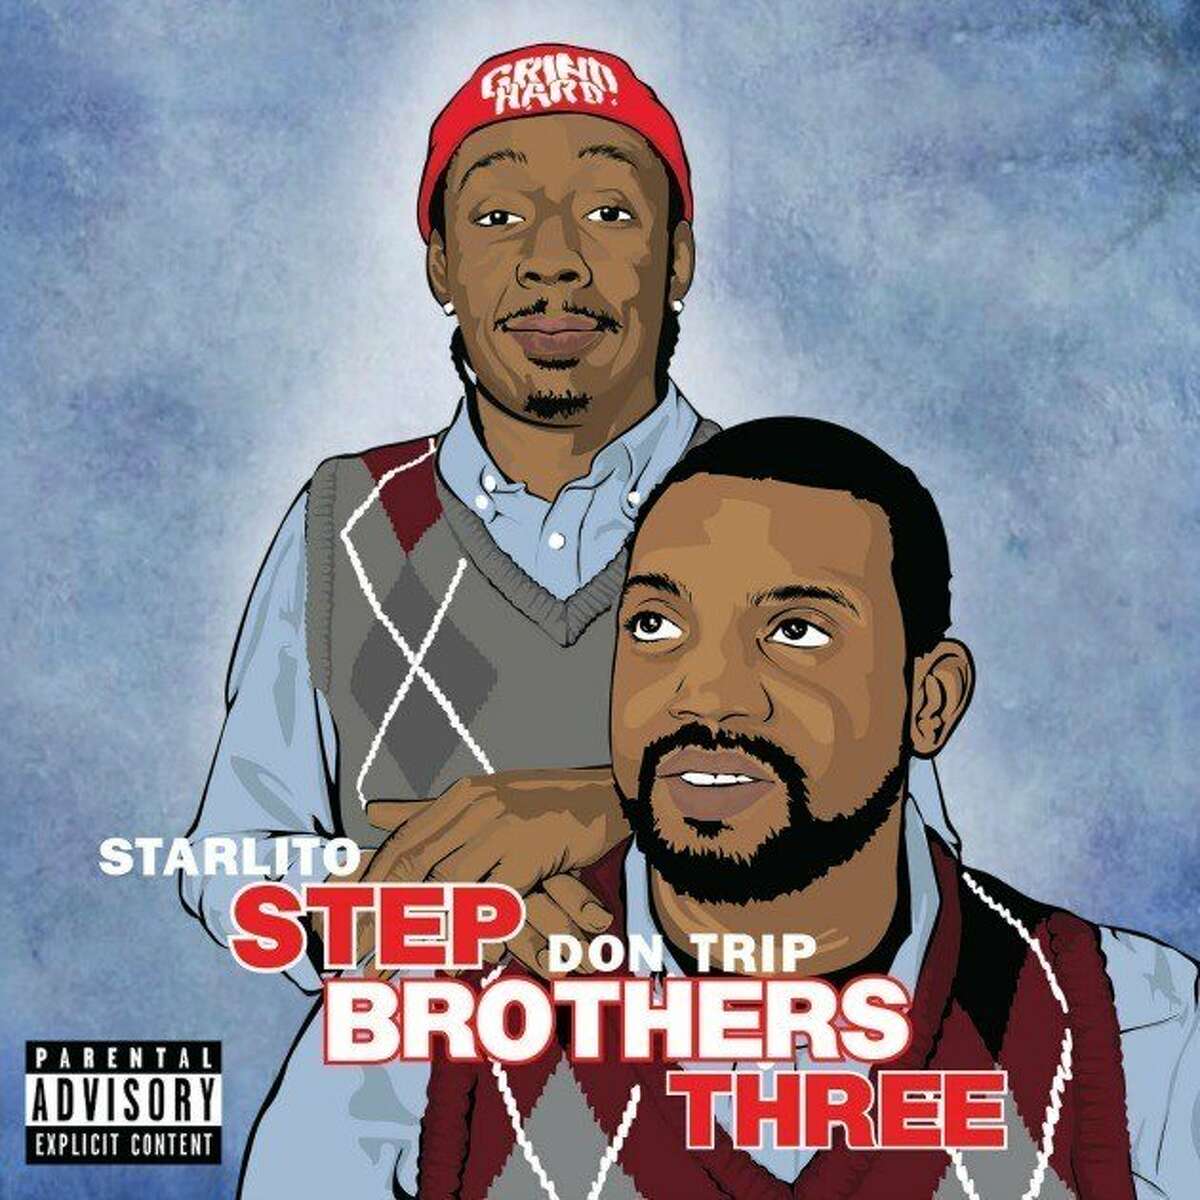 Don Trip and Starlito, "Good Cop Bad Cop" "When the call came through the dispatcher / 2-11, 187 how tragic, how tragic / In the back of his mind automatically / He assumed that the suspect was a black kid..."